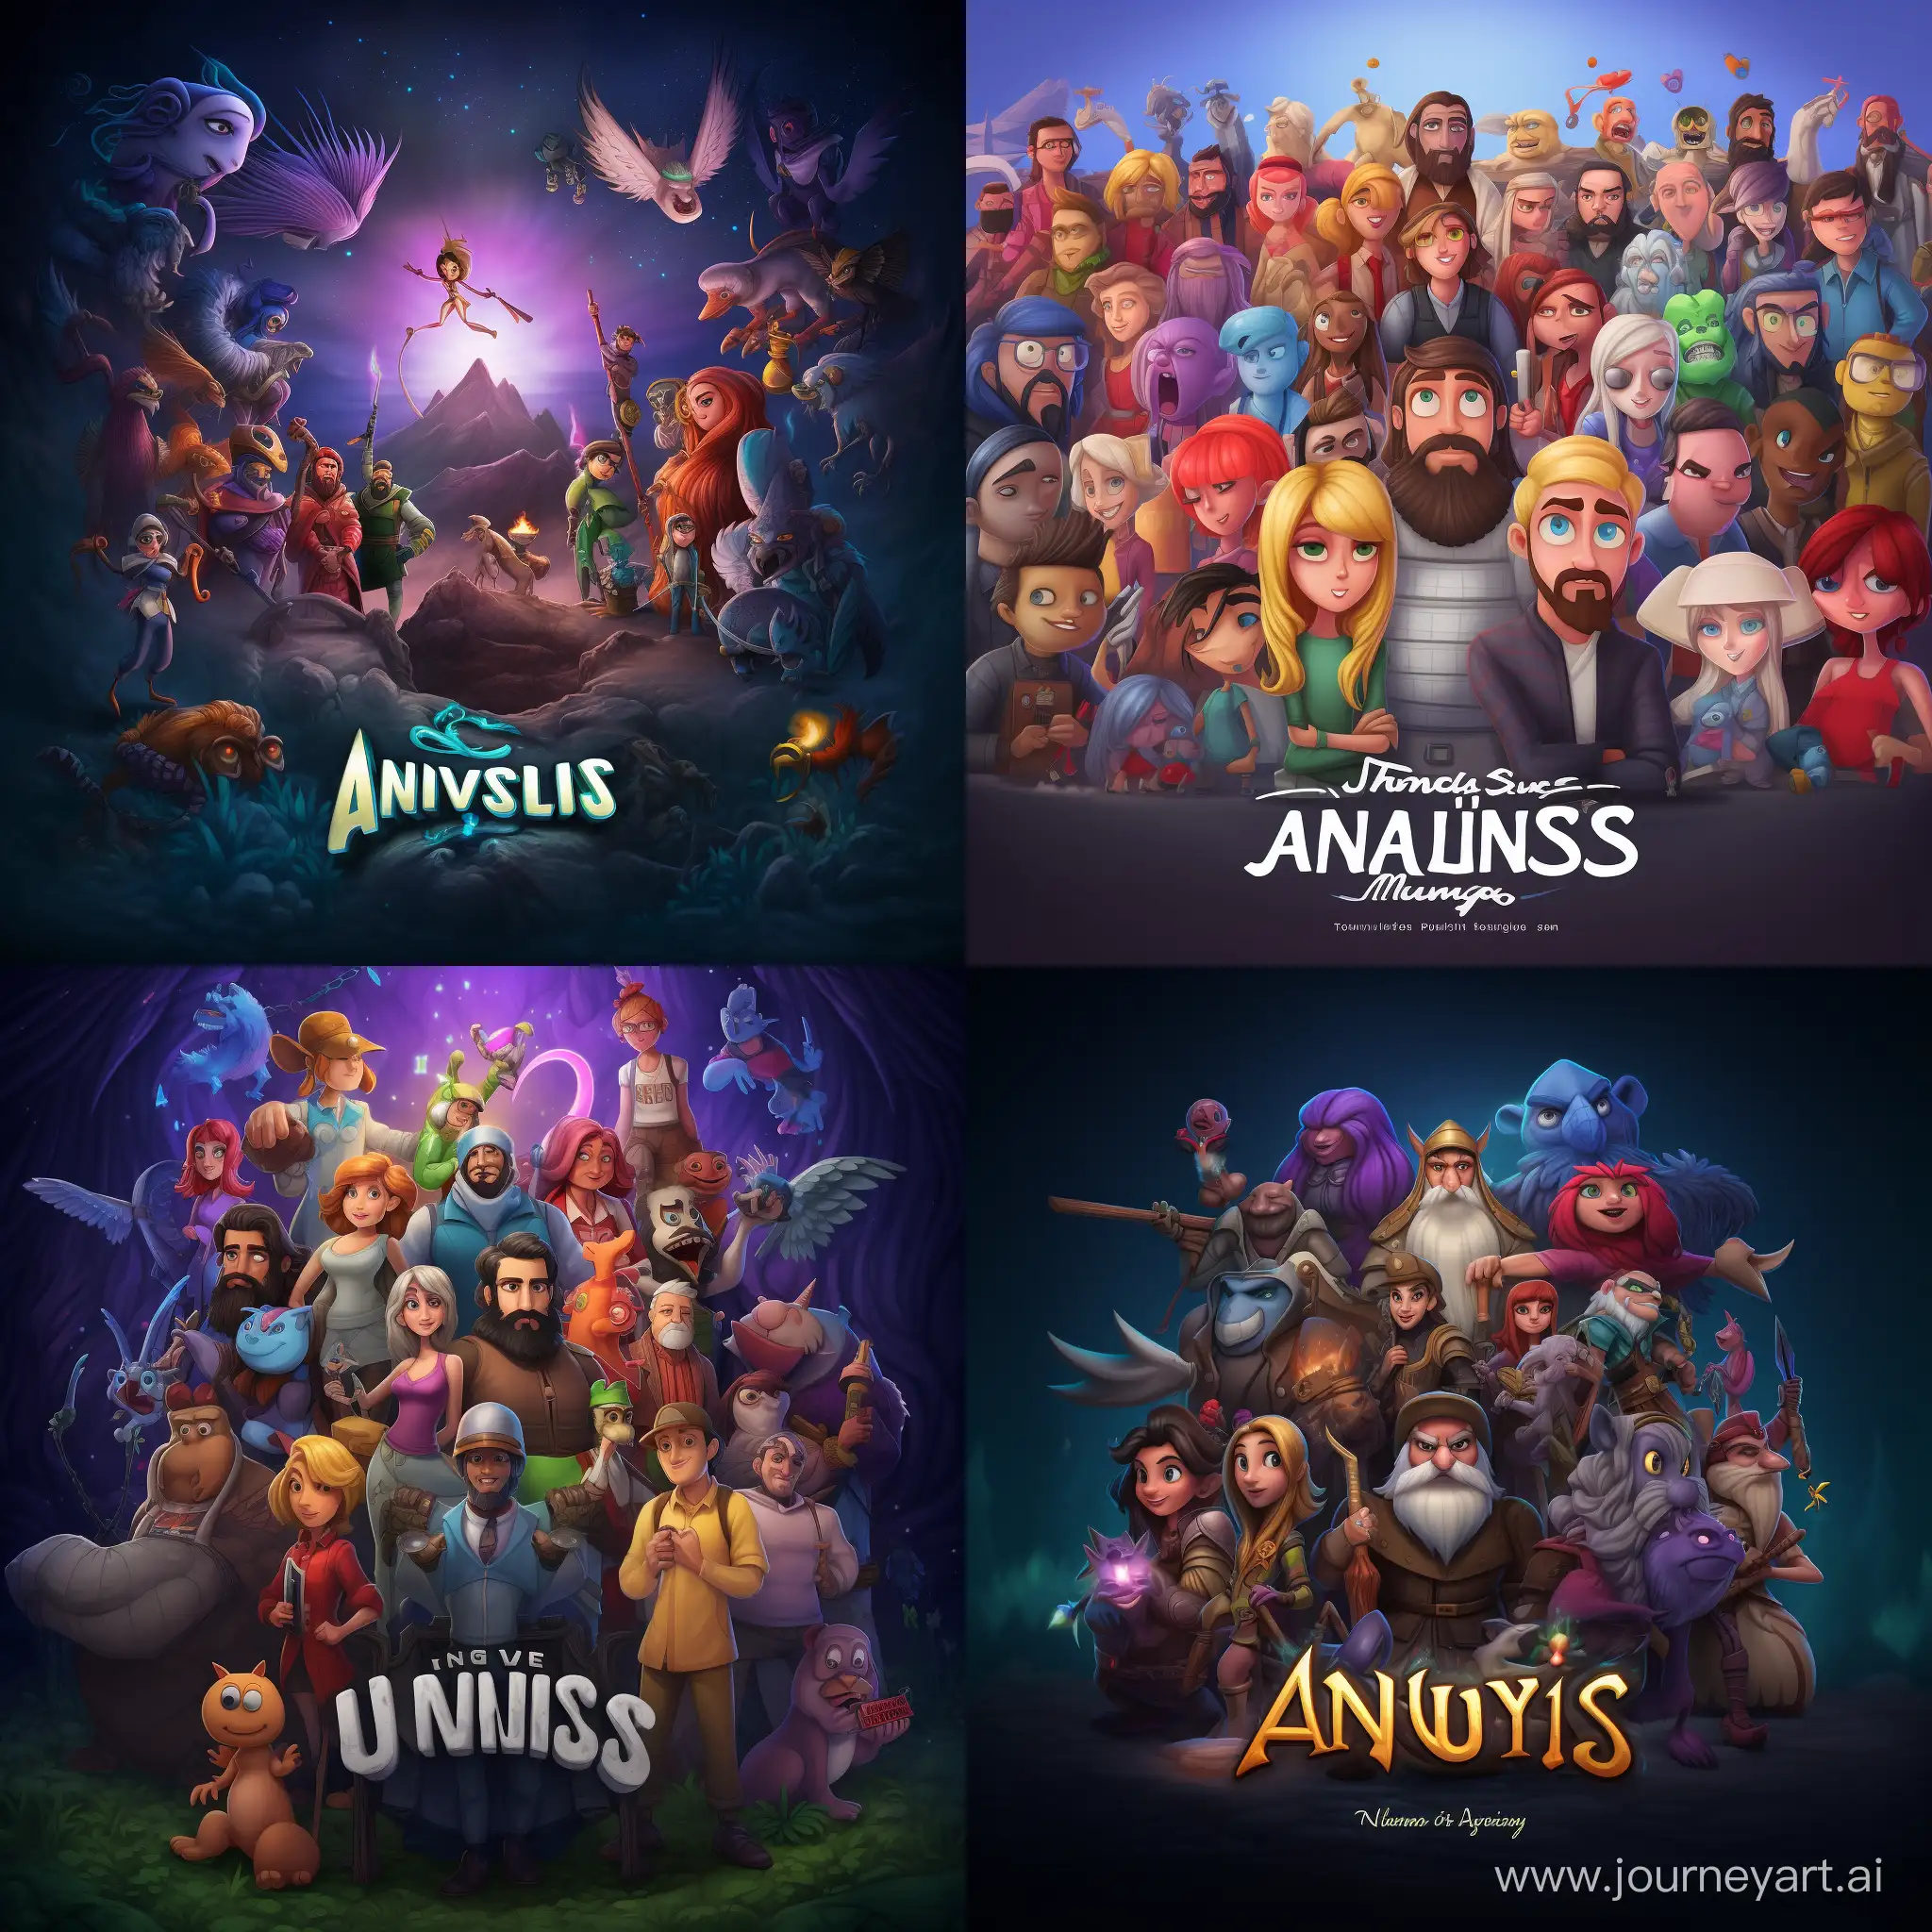 Disney/Pixar movie announcement poster with the title Among us and Among us characters